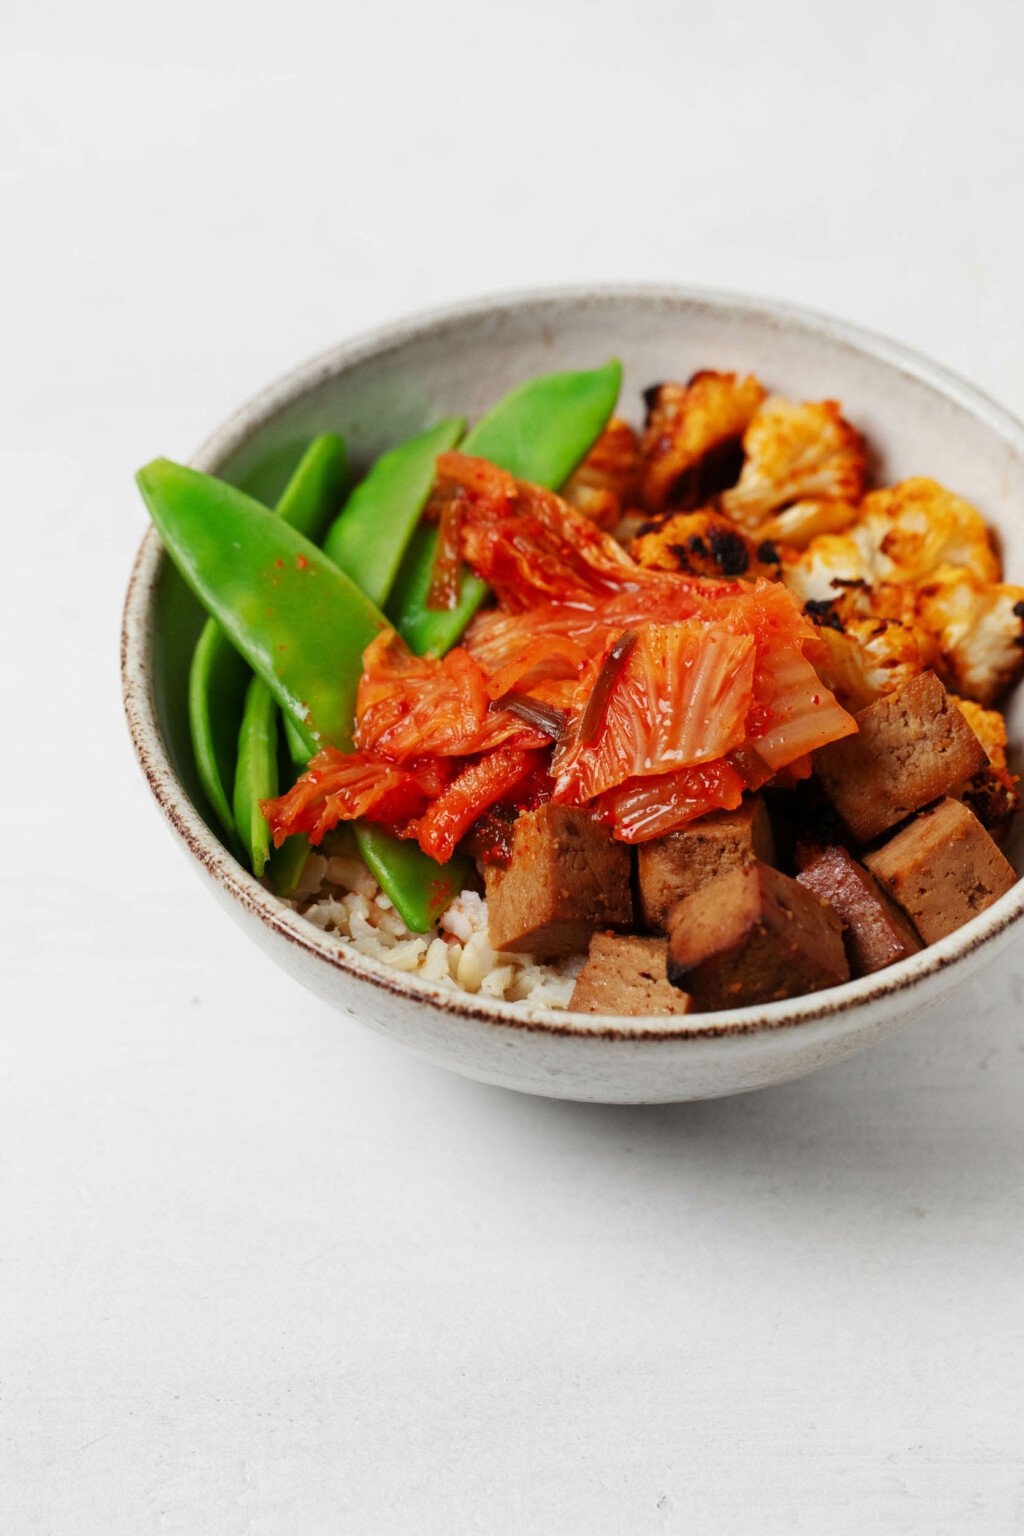 A chili roasted cauliflower and brown rice kimchi bowl is resting on a white surface.